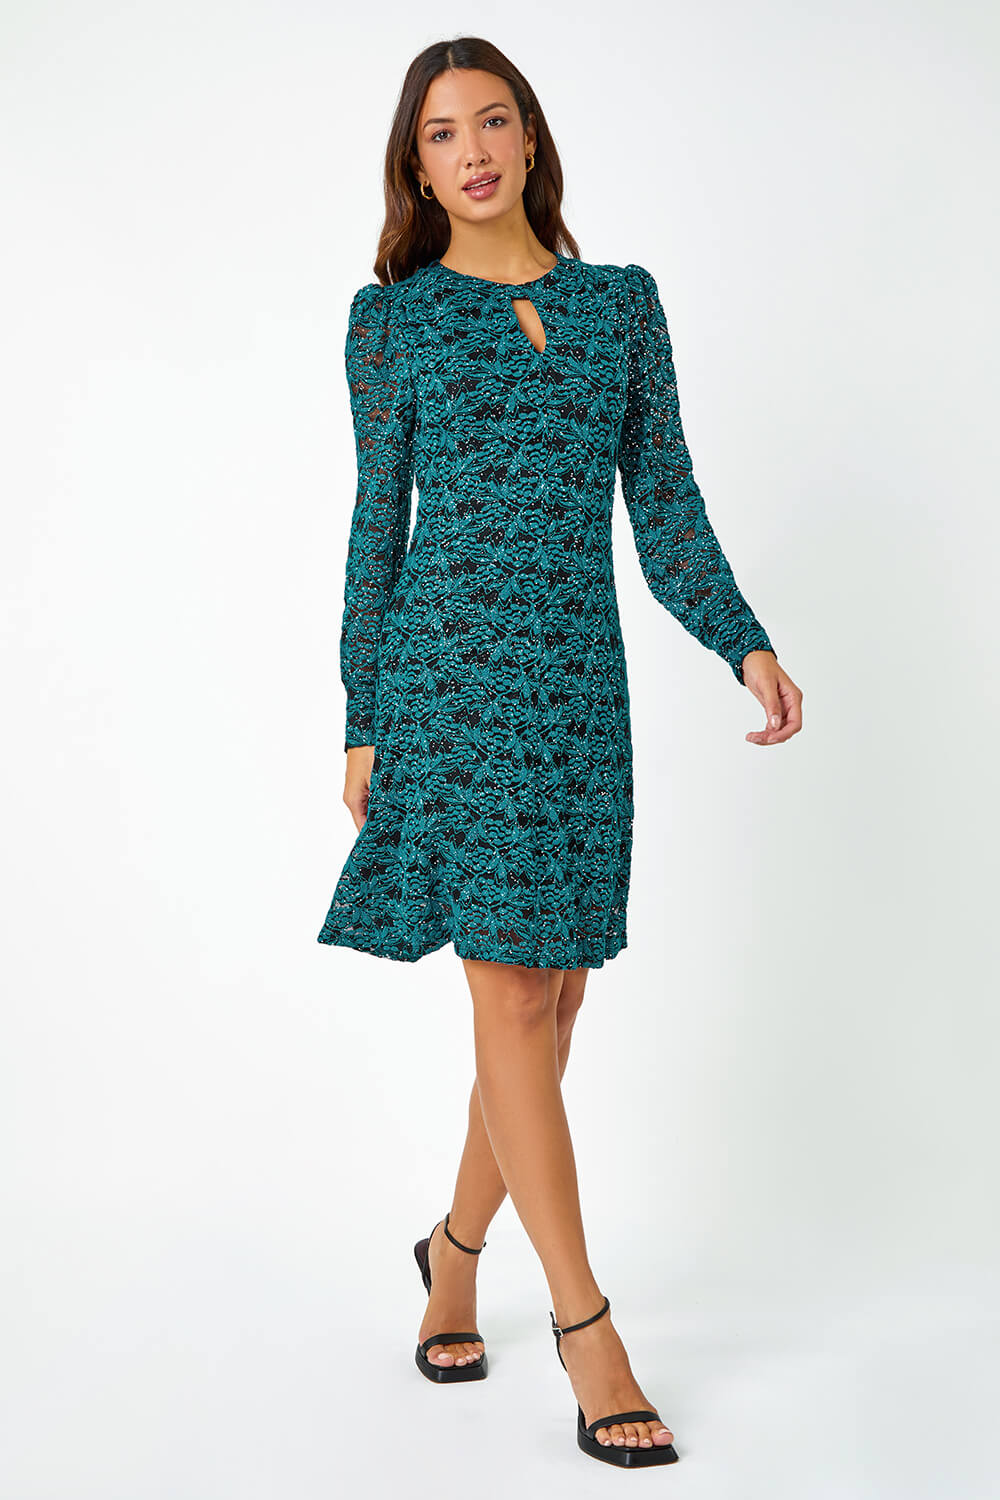 Teal Stretch Lace Sparkle Swing Dress, Image 2 of 5